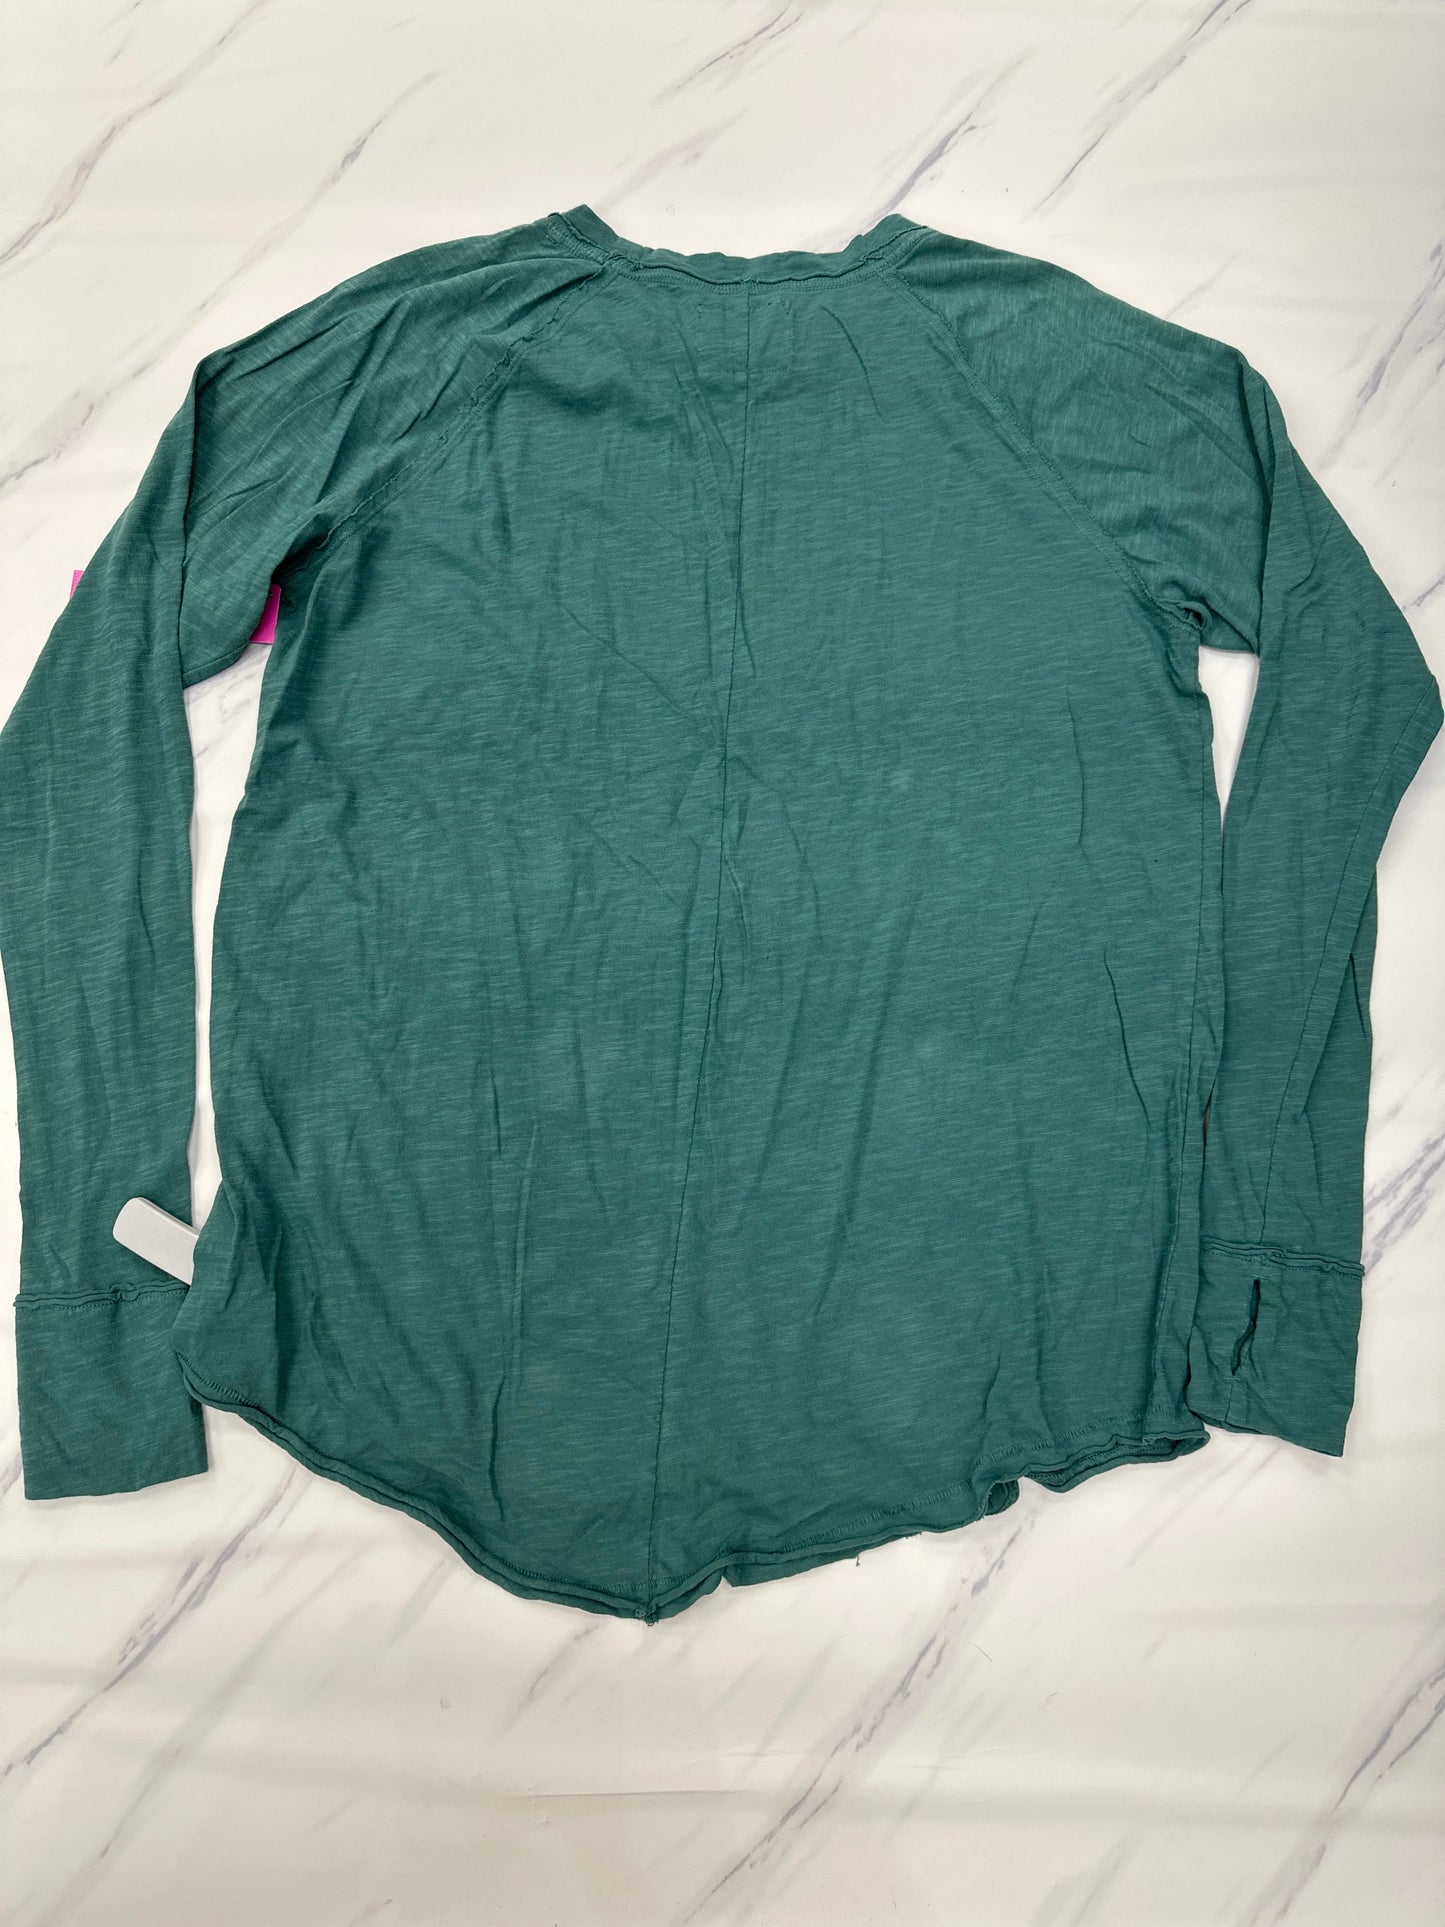 Green Top Long Sleeve We The Free, Size M